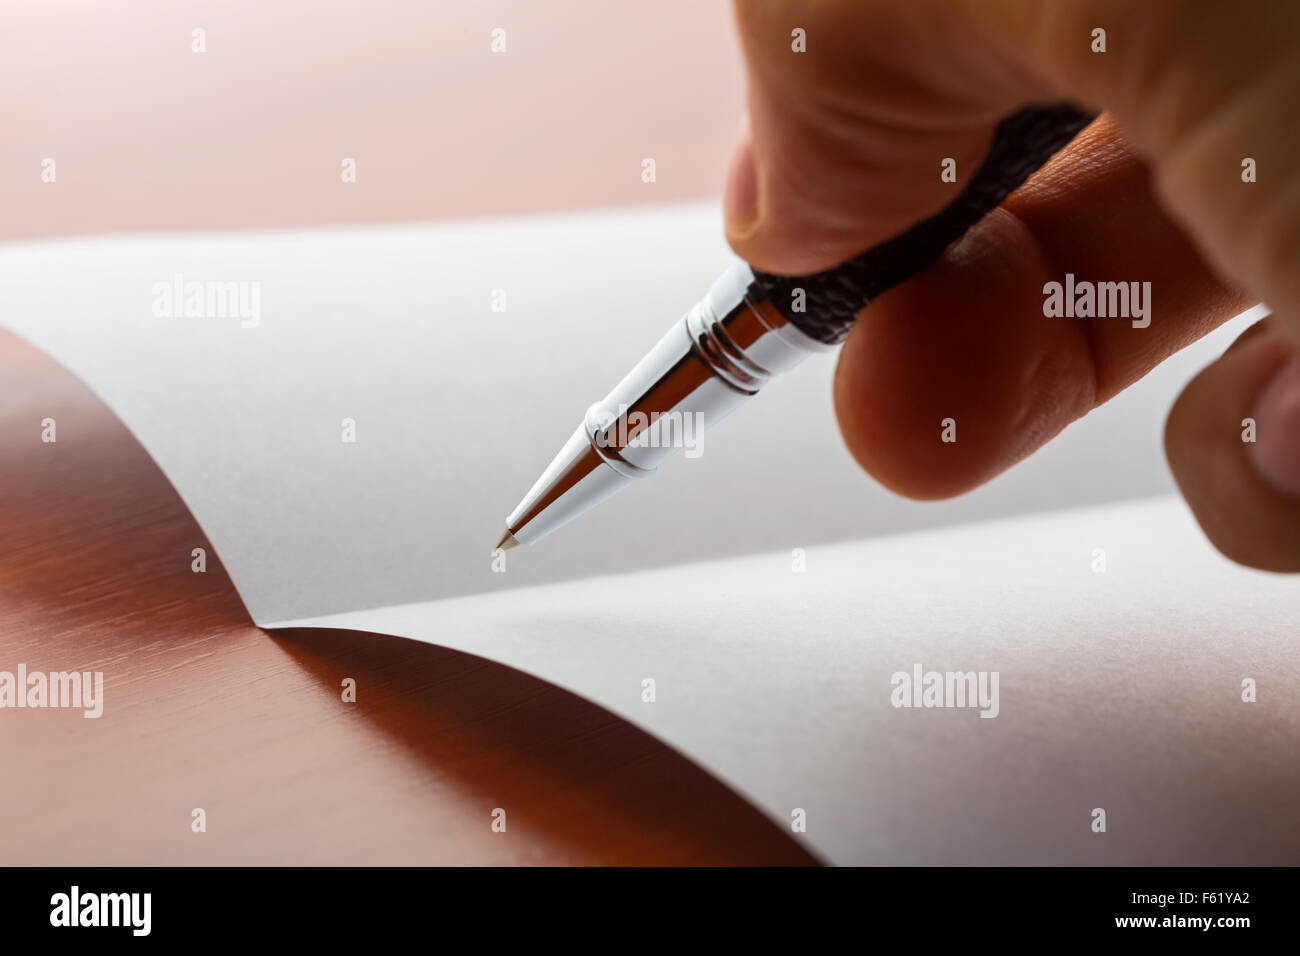 Human hand writing on paper by ball pen on a wooden table Stock Photo